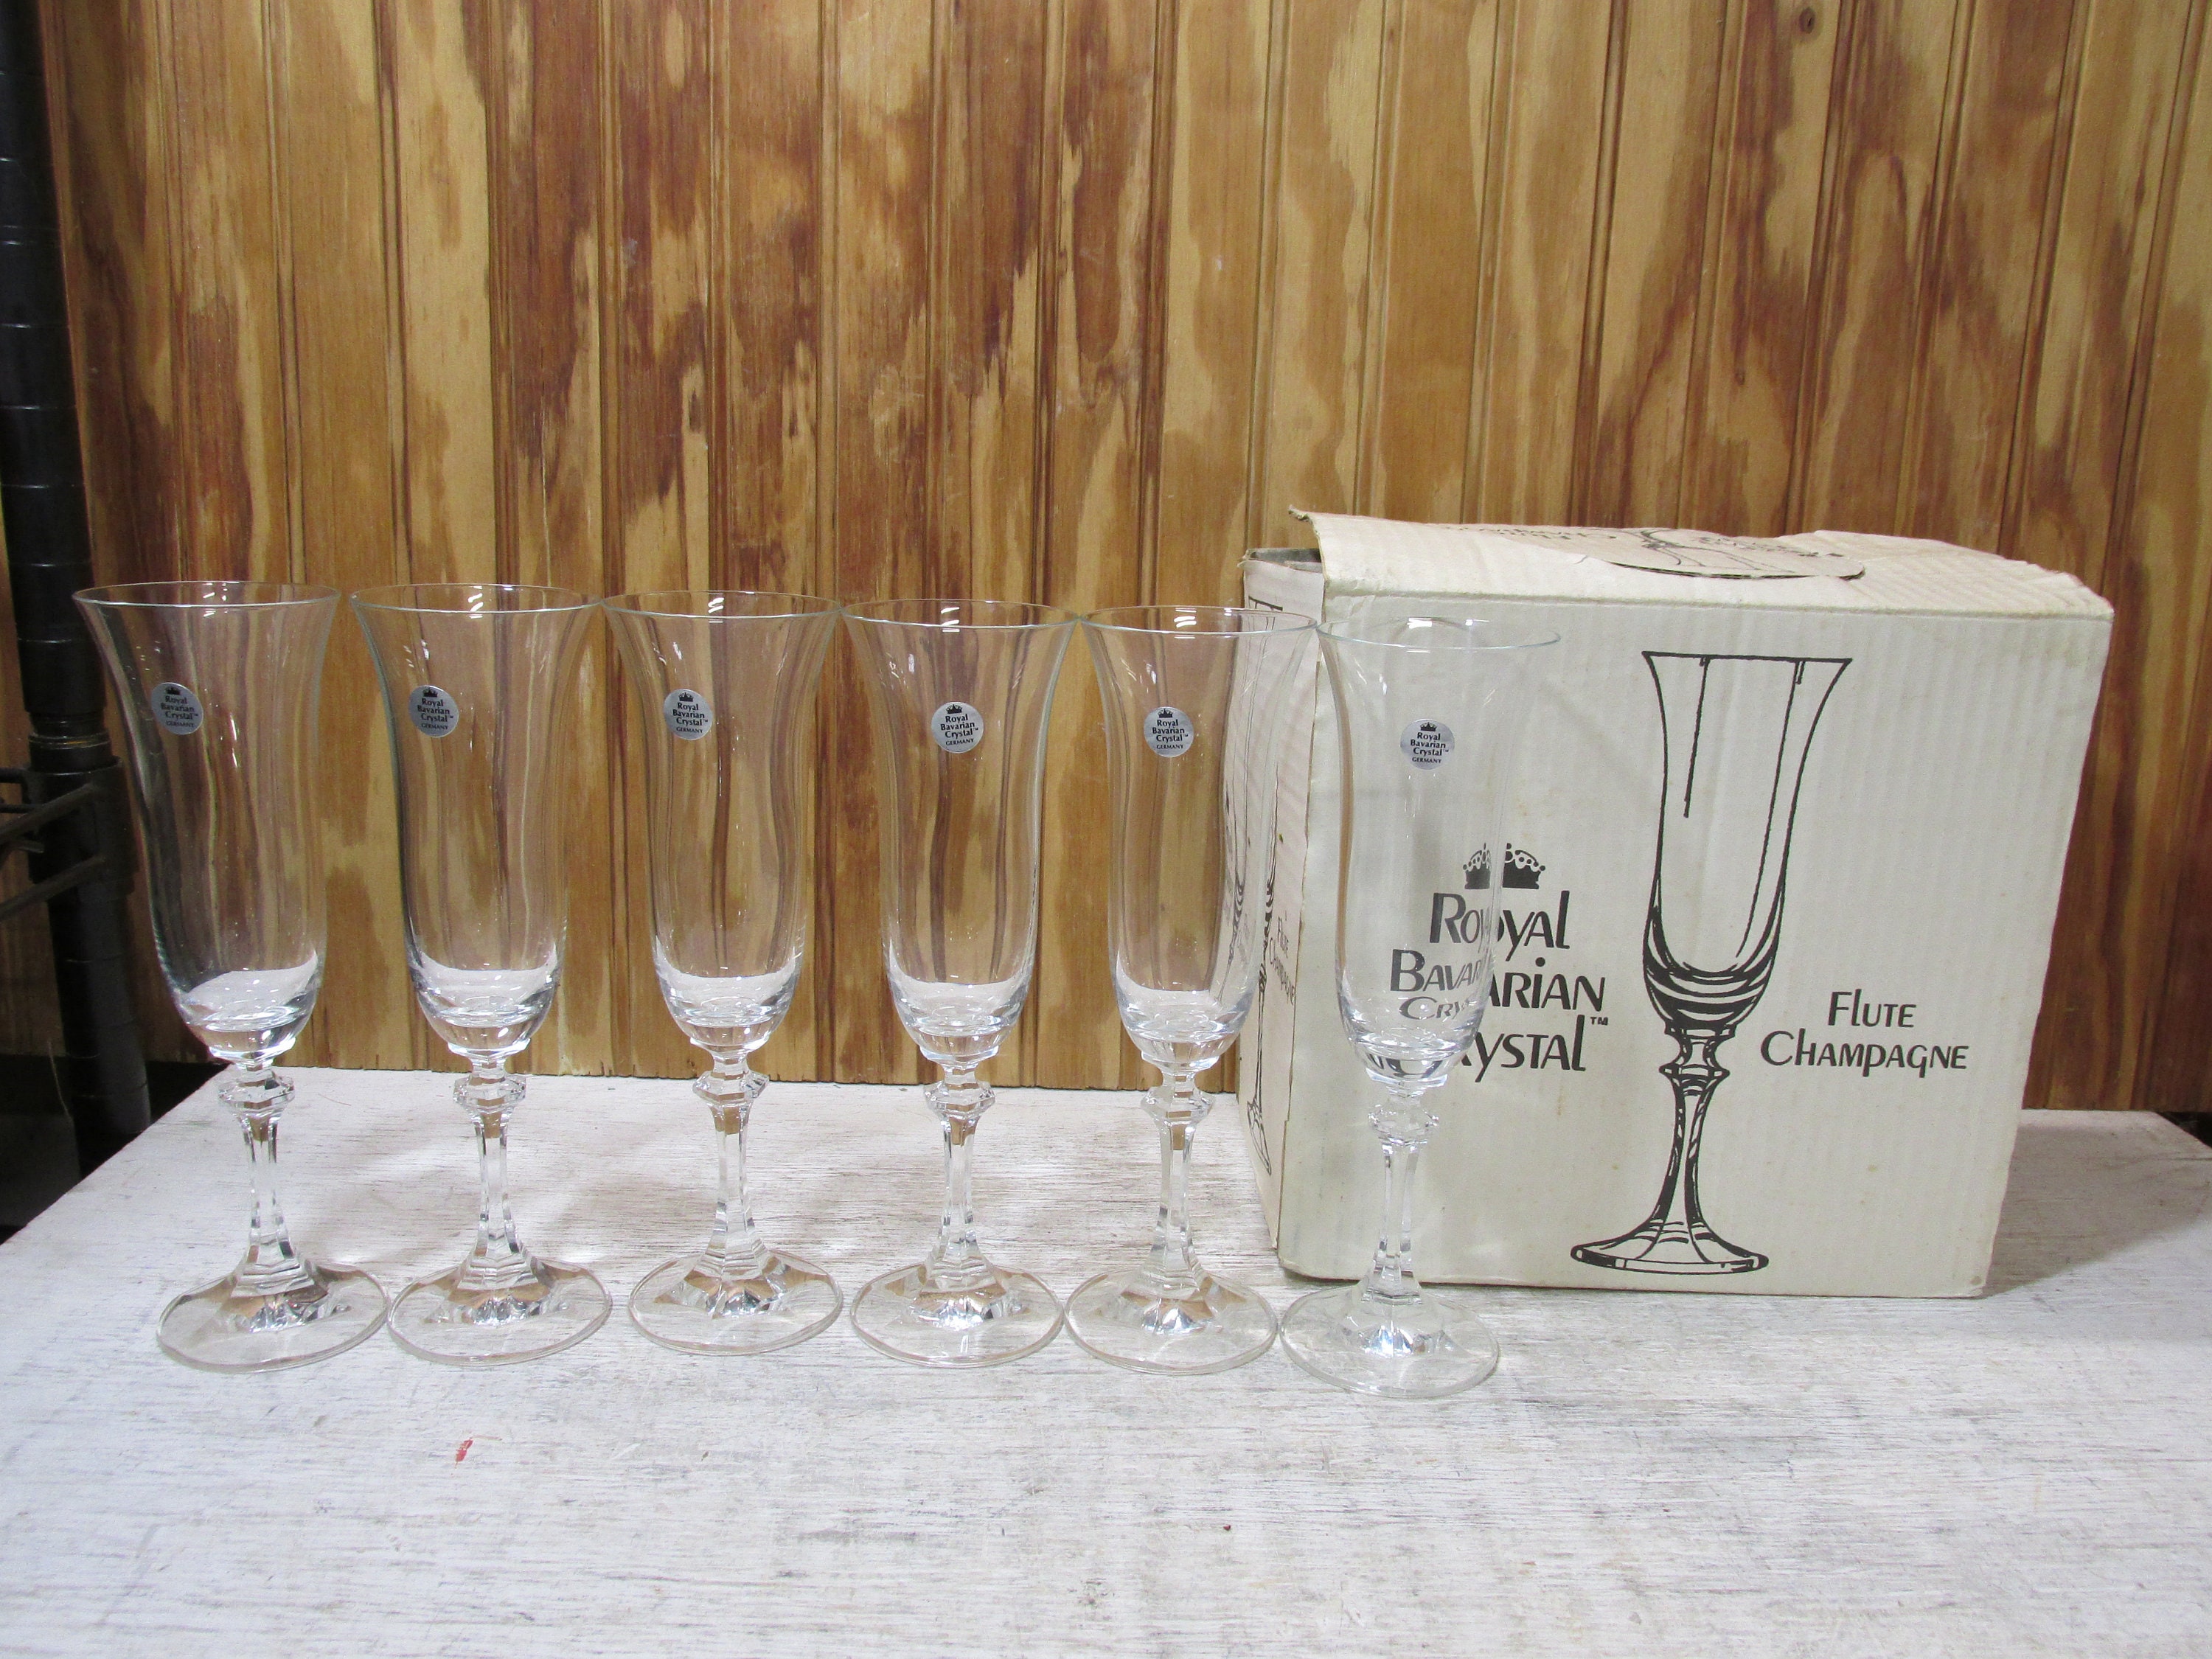 German Crystal Champagne Flute Glasses, 1980s, Set of 6 for sale at Pamono